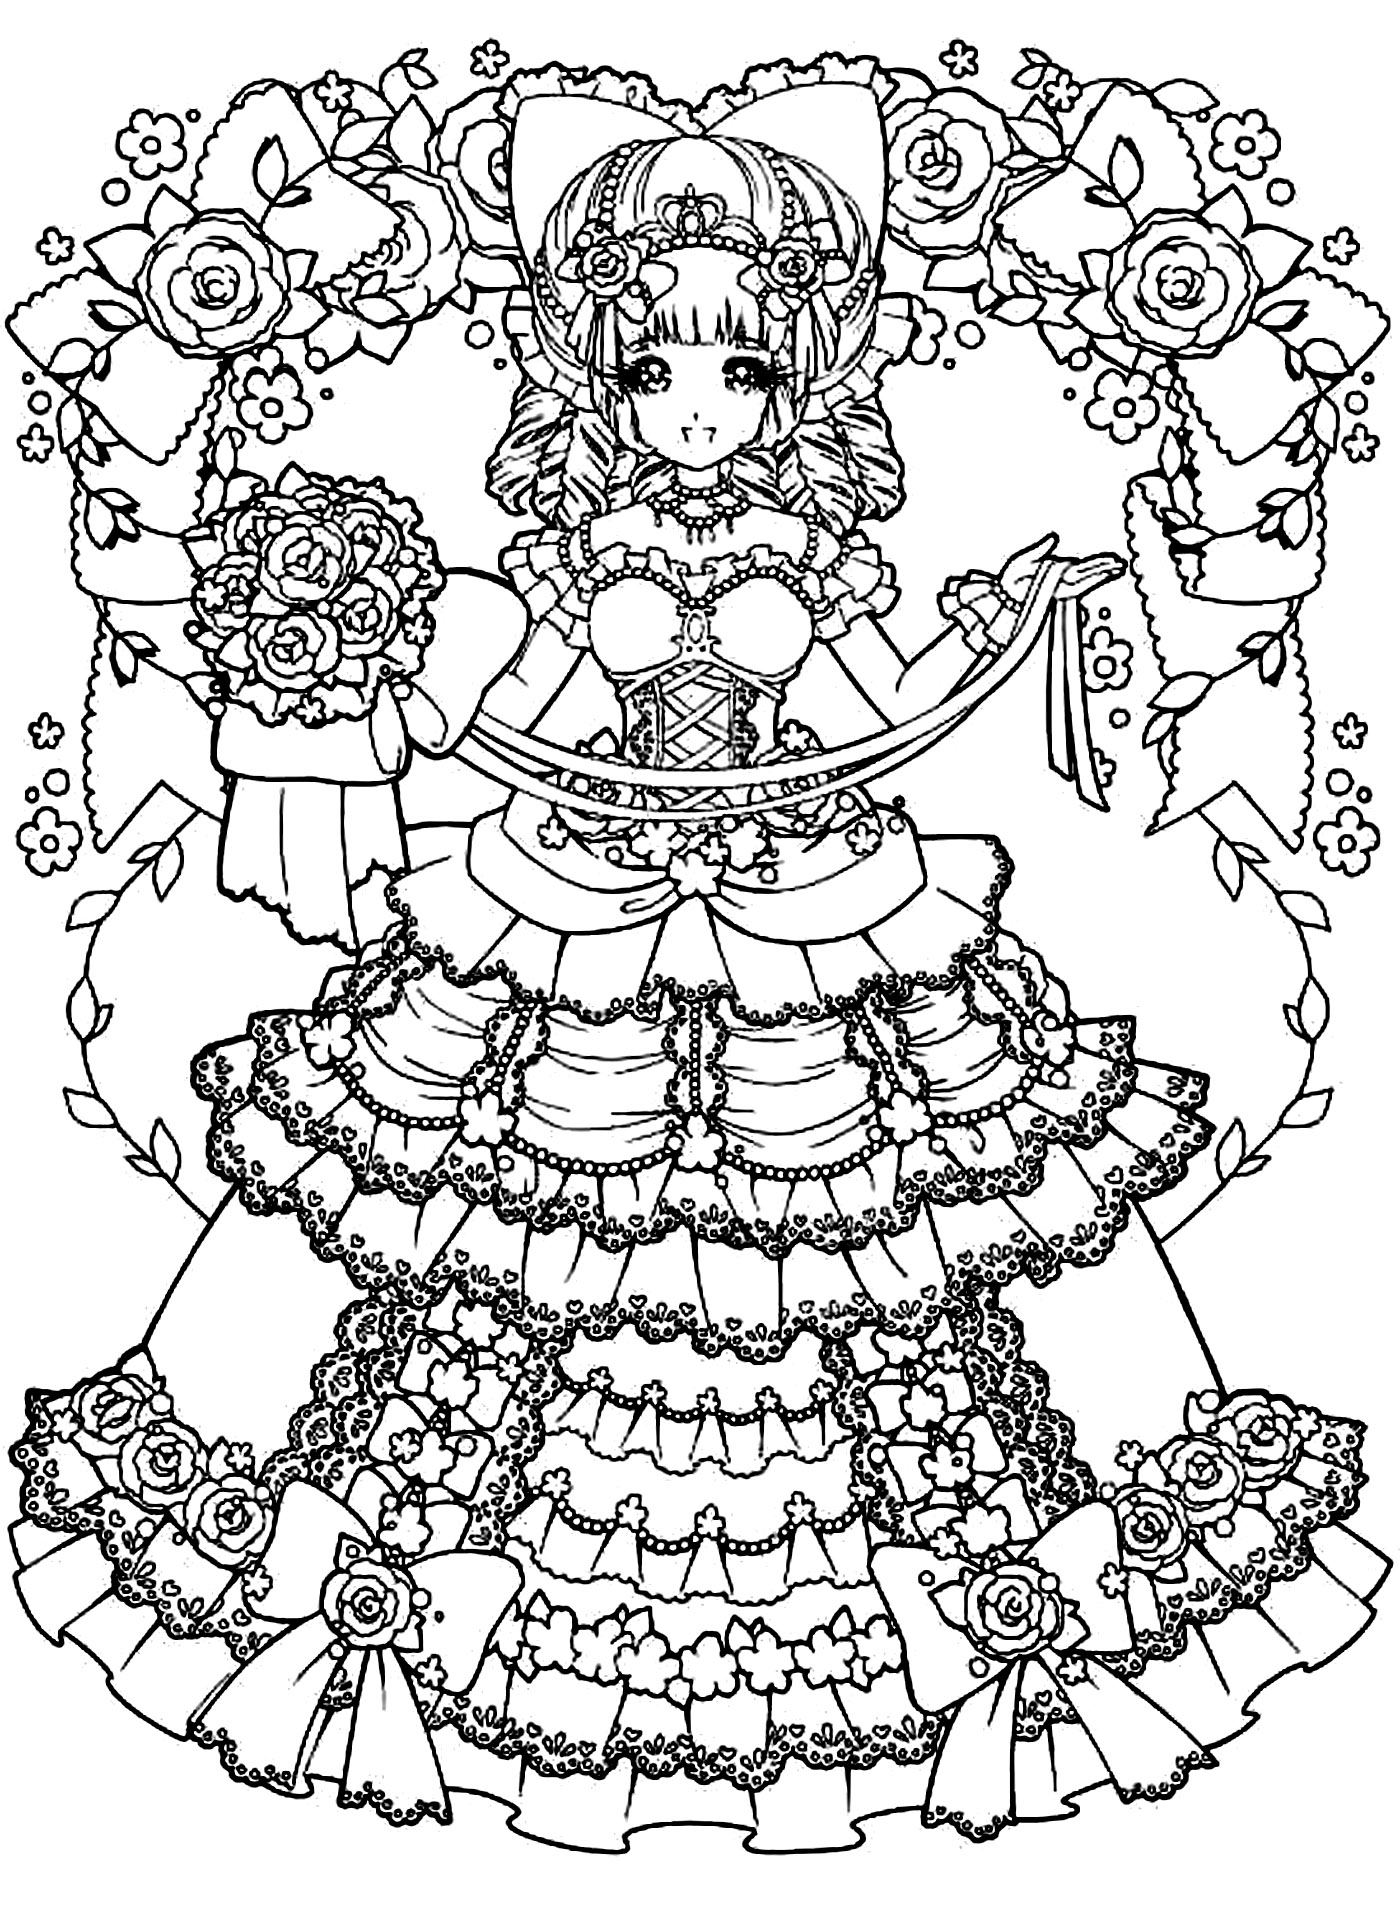 A Manga girl with an incredible dress, full of details to color